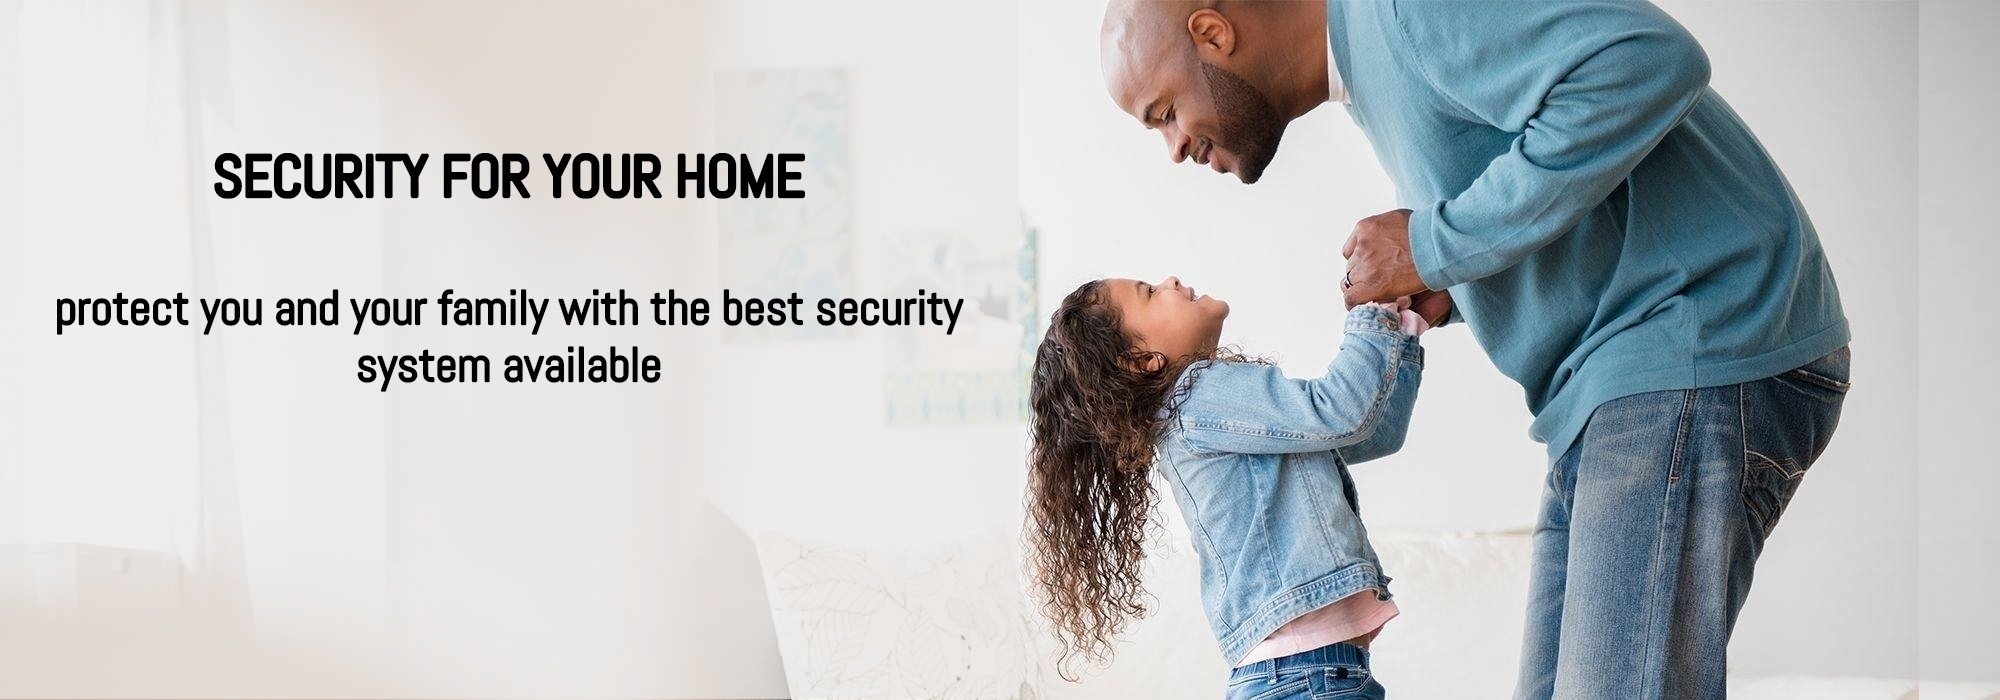 HOME-SECURITY-FOR-YOUR-HOME